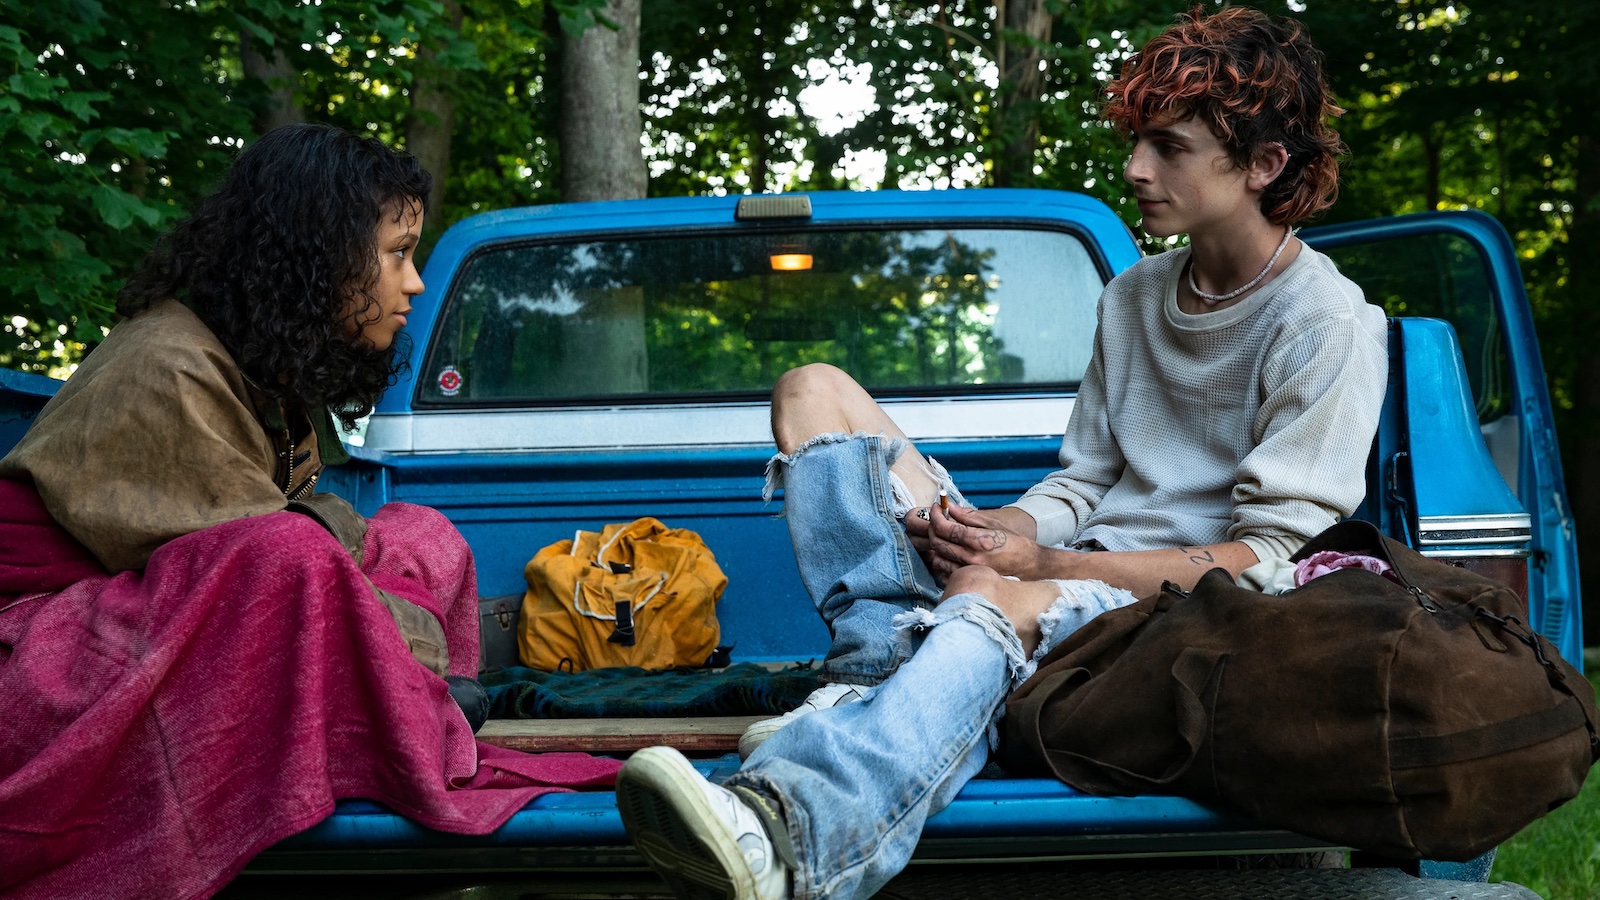 Timothée Chalamet shares poster for his new cannibal romance ‘Bones and All’